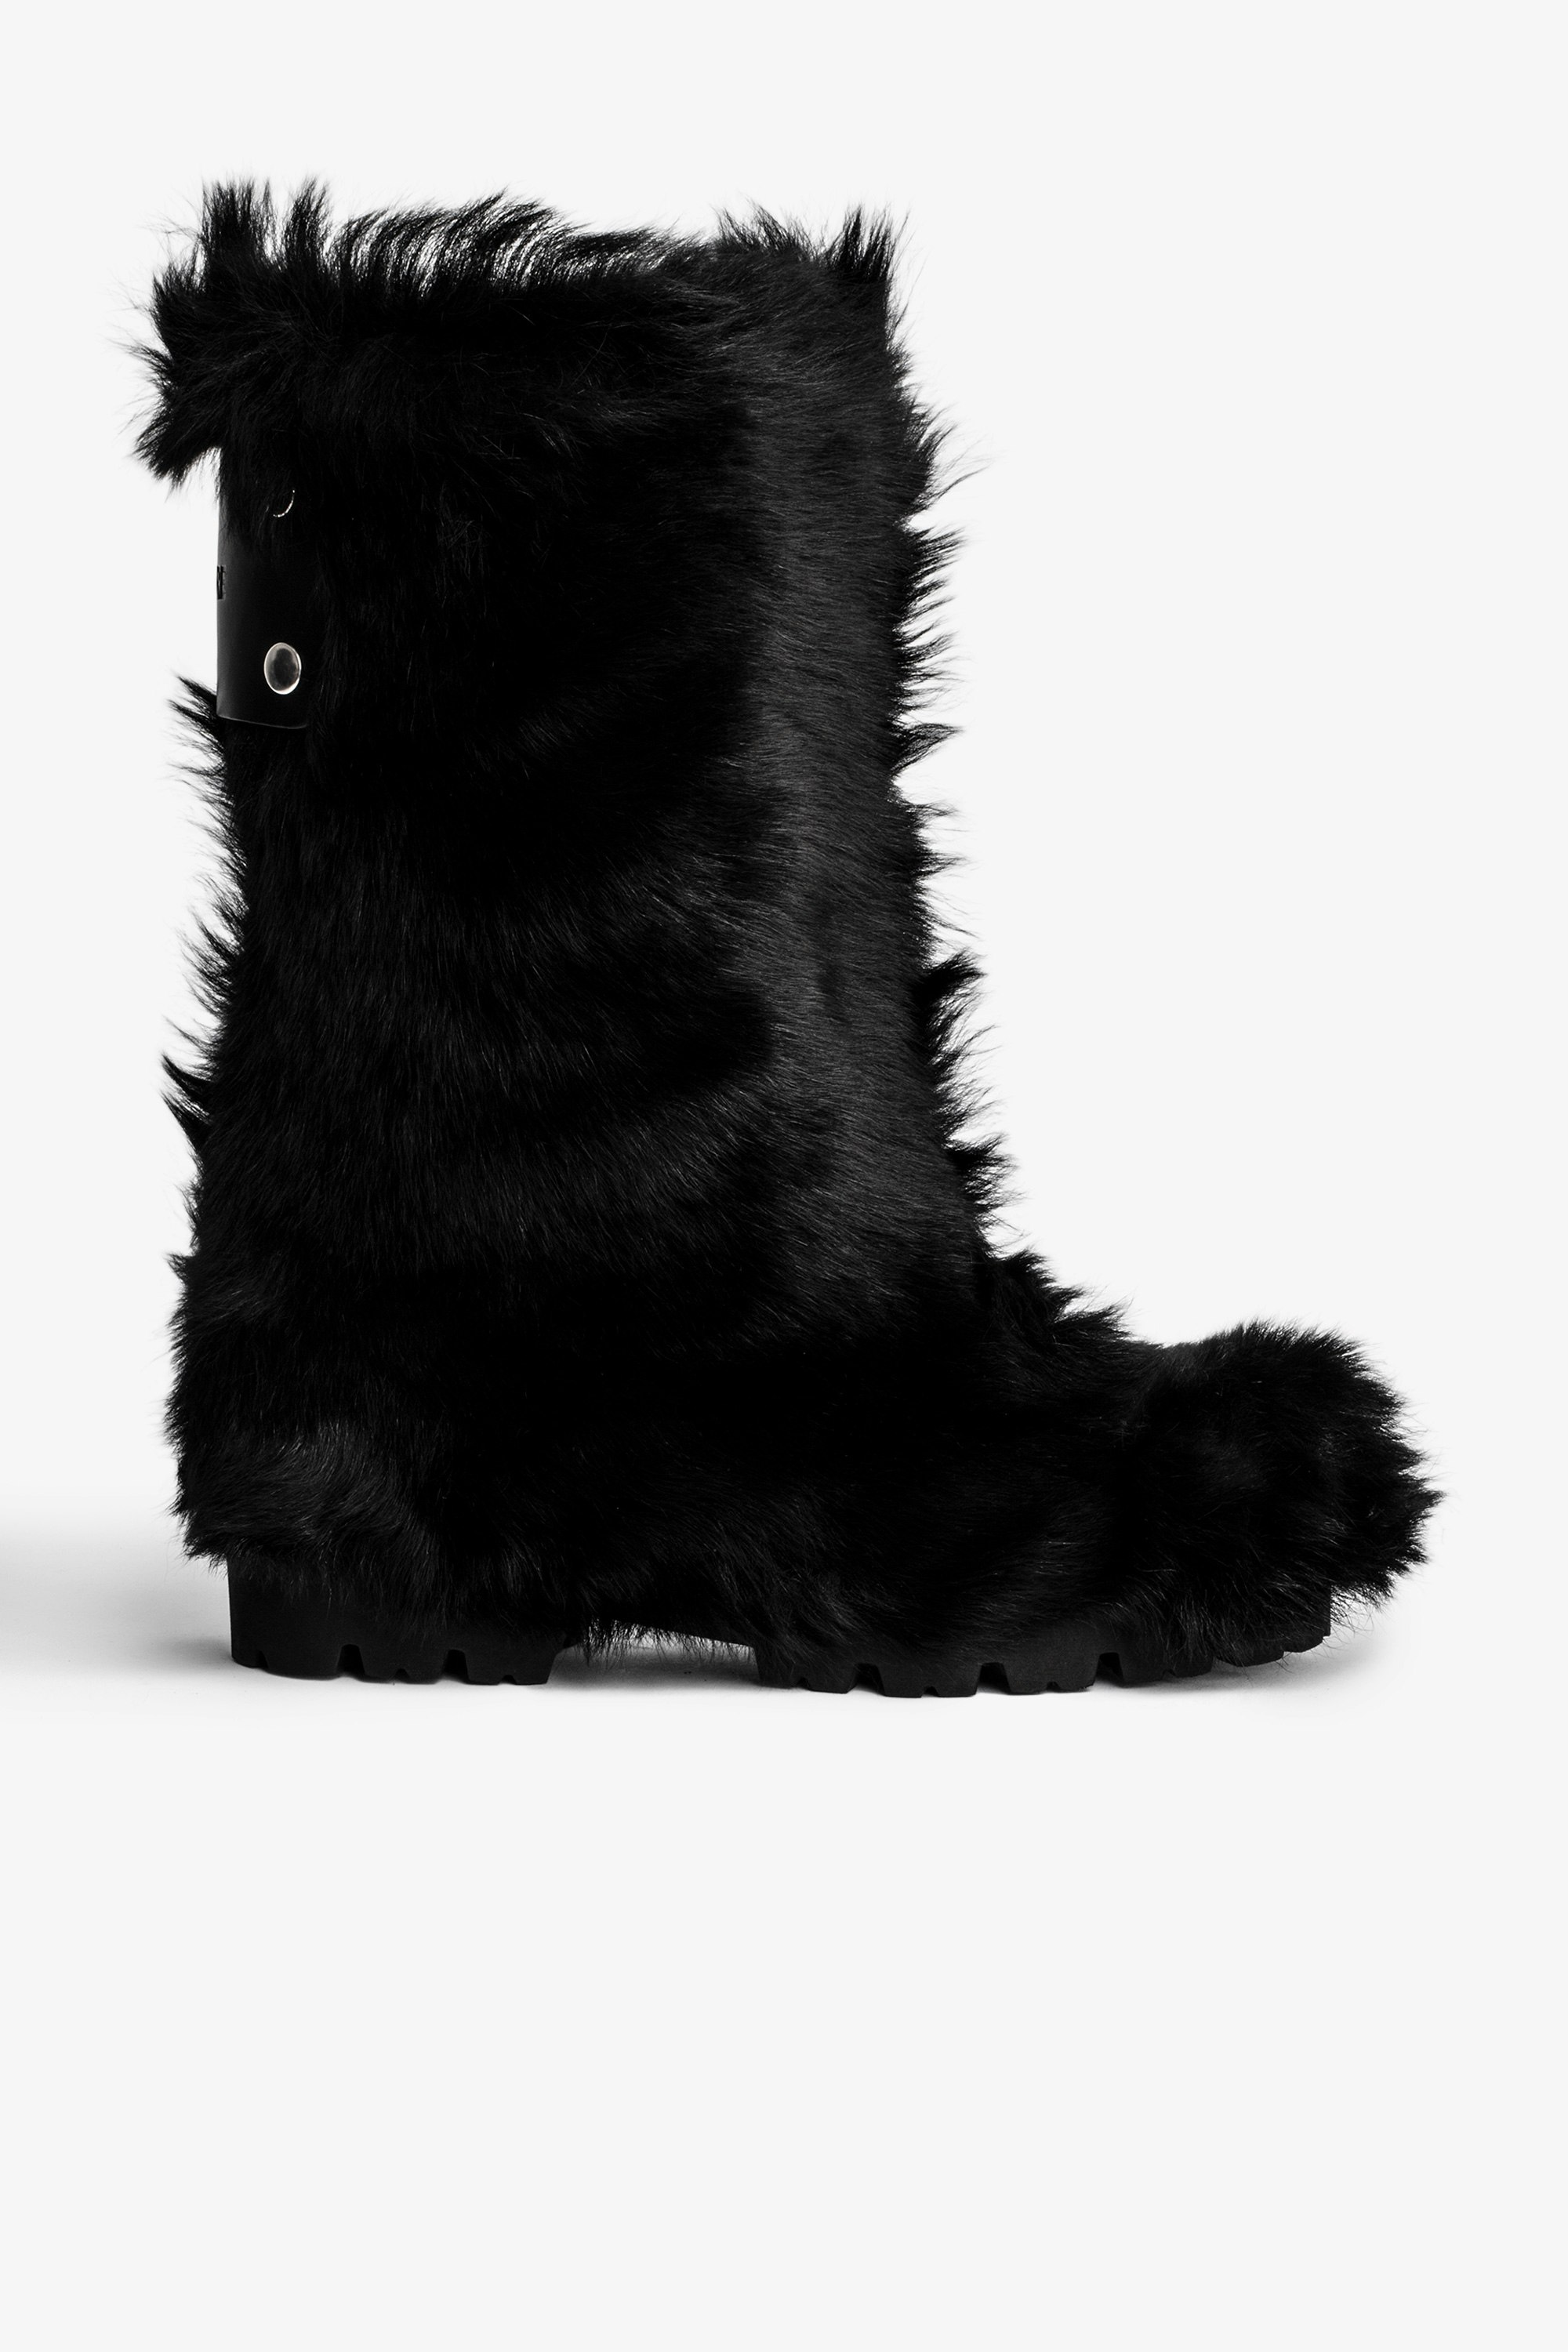 Joe Ankle ブーツ Women’s black faux fur ankle boots with a leather back panel featuring the brand logo